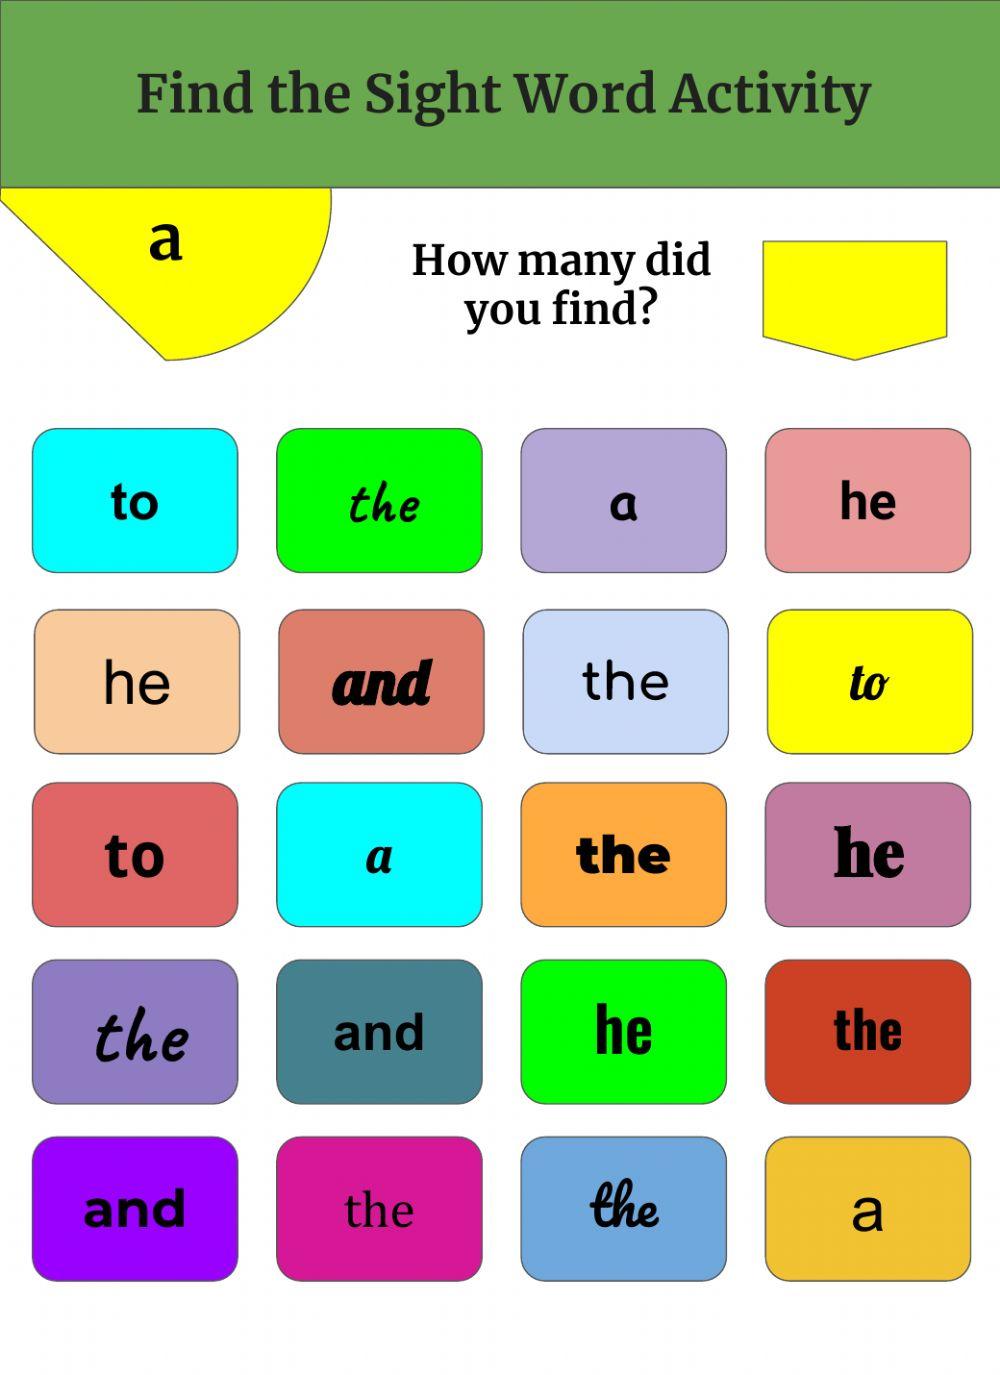 Find the Sight Word